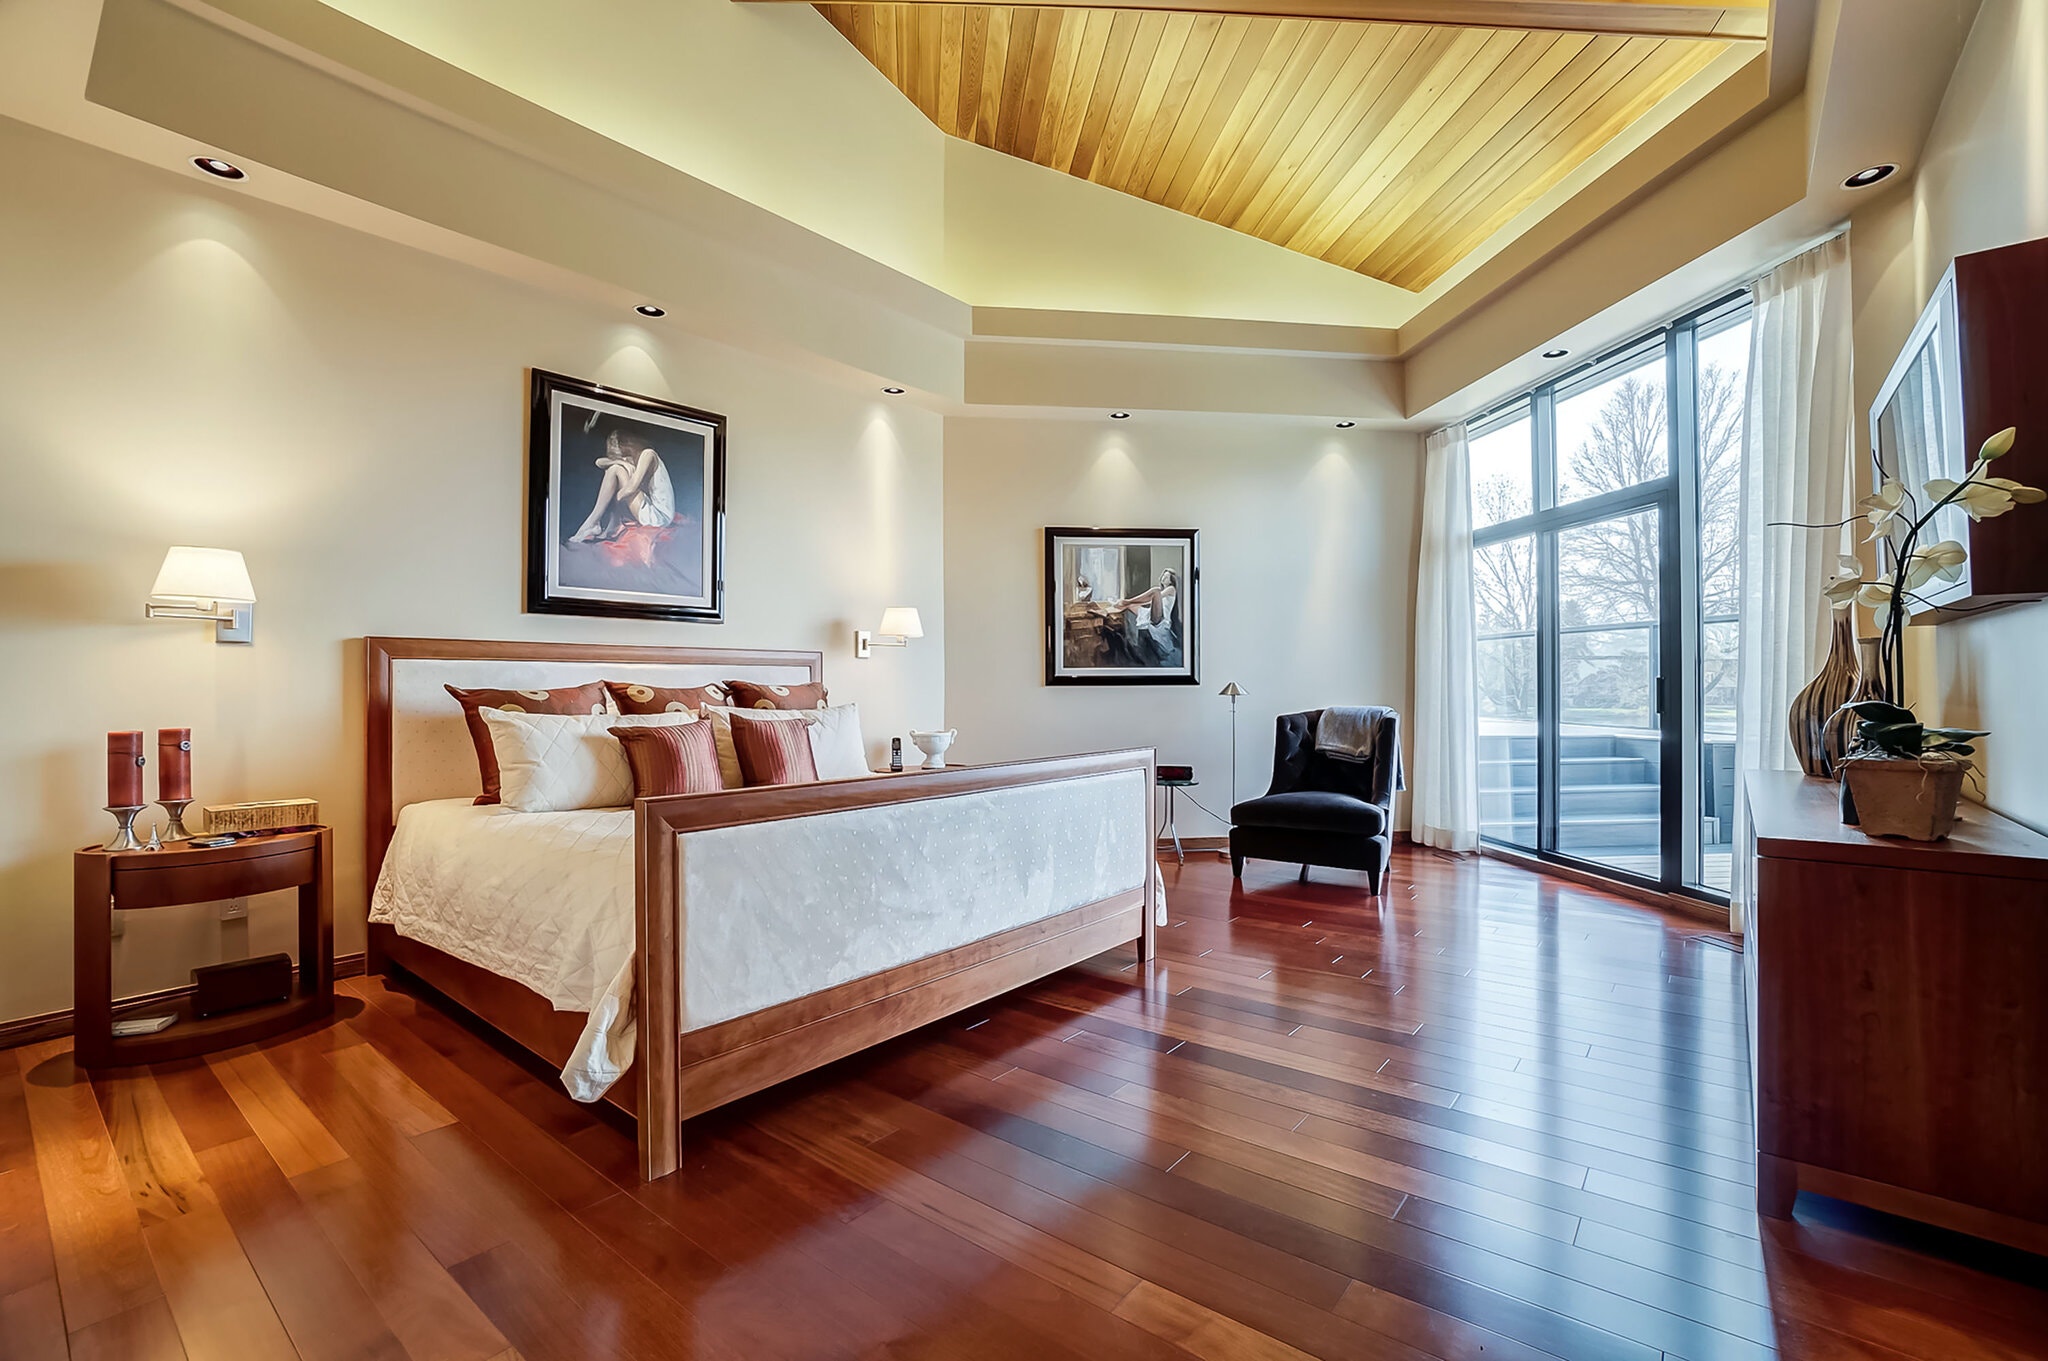 The angled ceiling in the main bedroom suite repeats the wood-beamed design in the great room. The suite connects to a deck through a patio door.